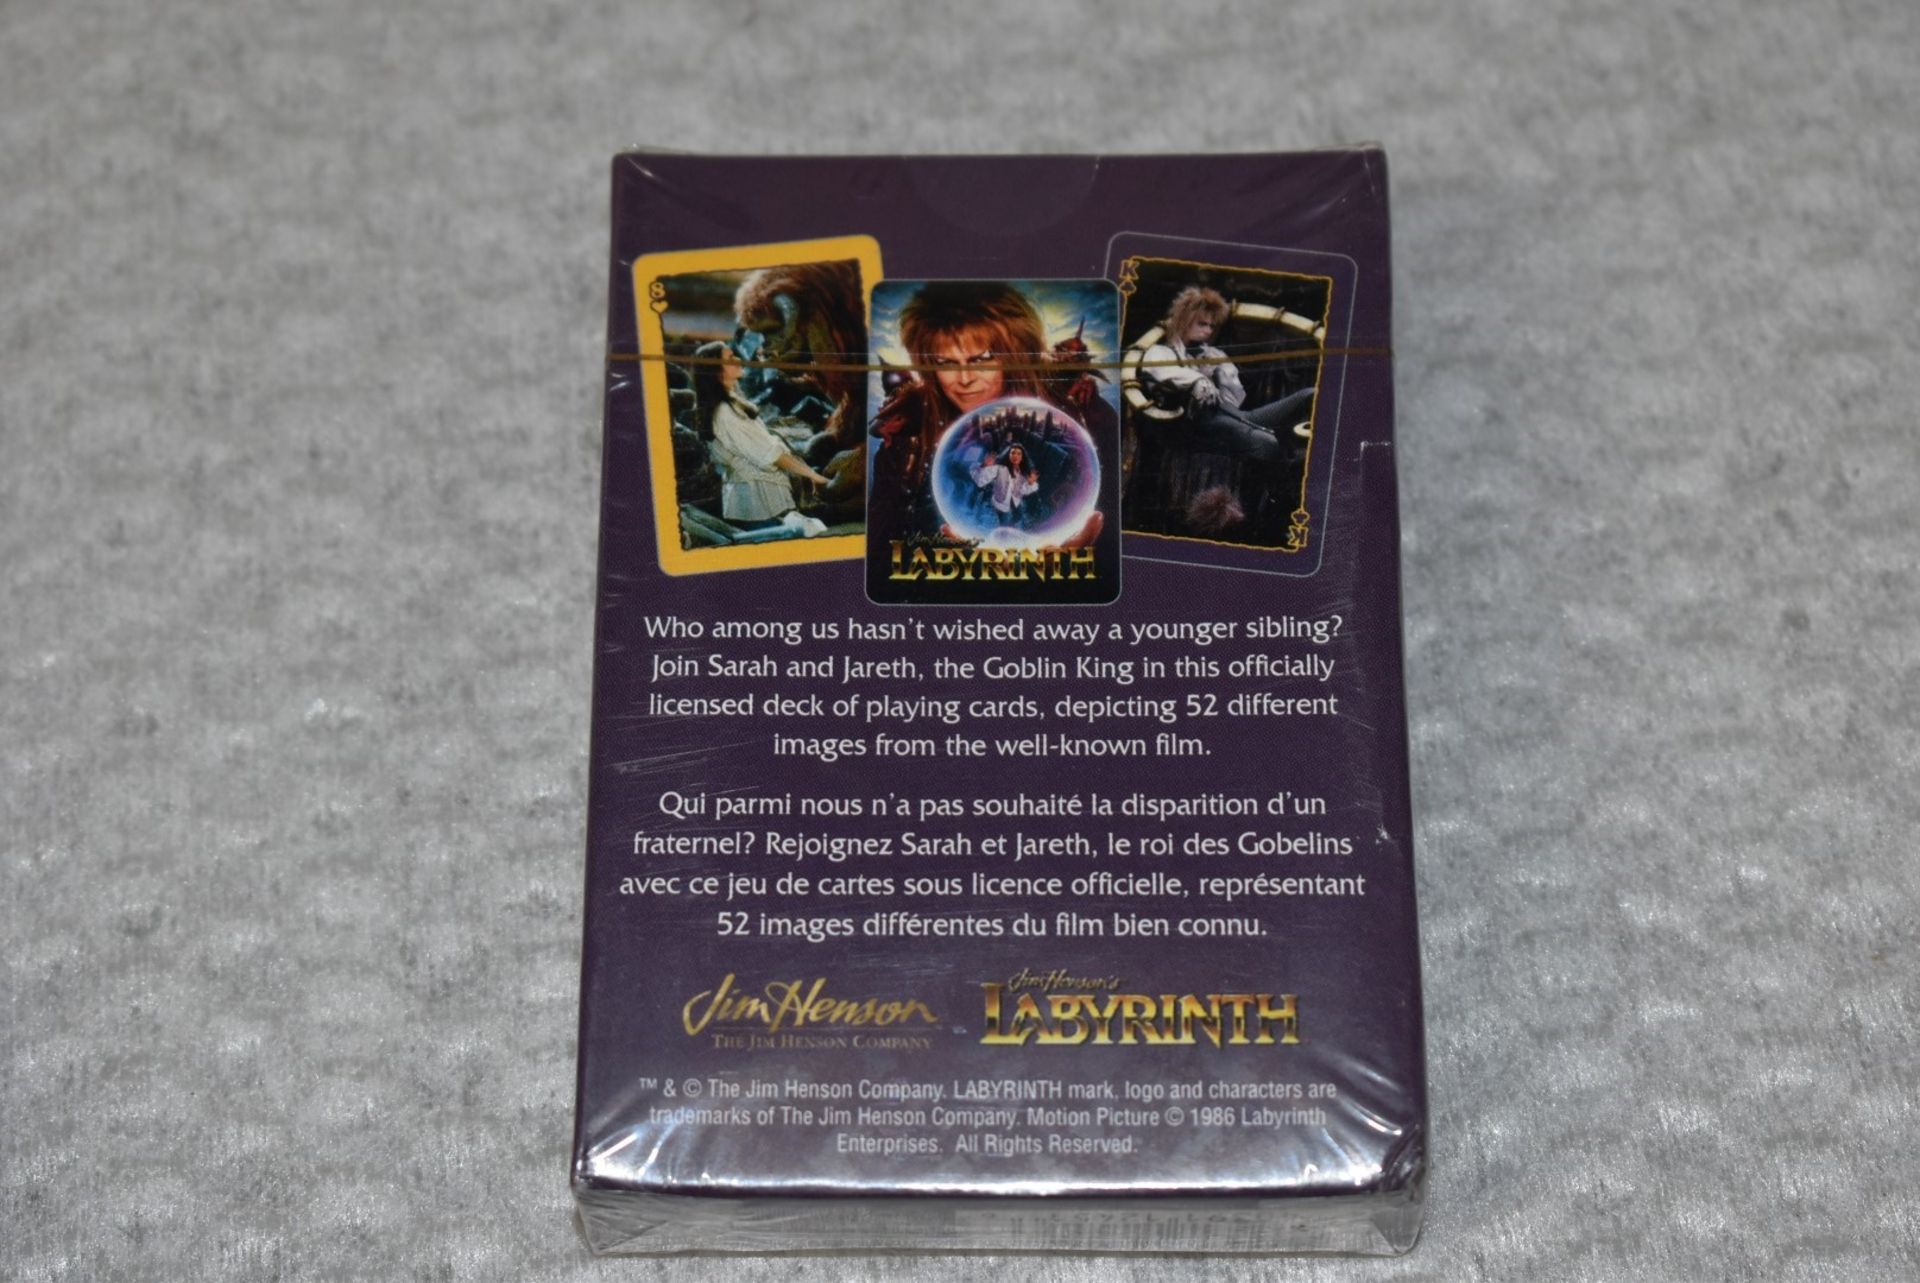 12 x Packs of Themed Playing Cards Featuring Jimi Hendrix, Fender, Labyrinth & Kiss - RRP £120 - Image 4 of 7